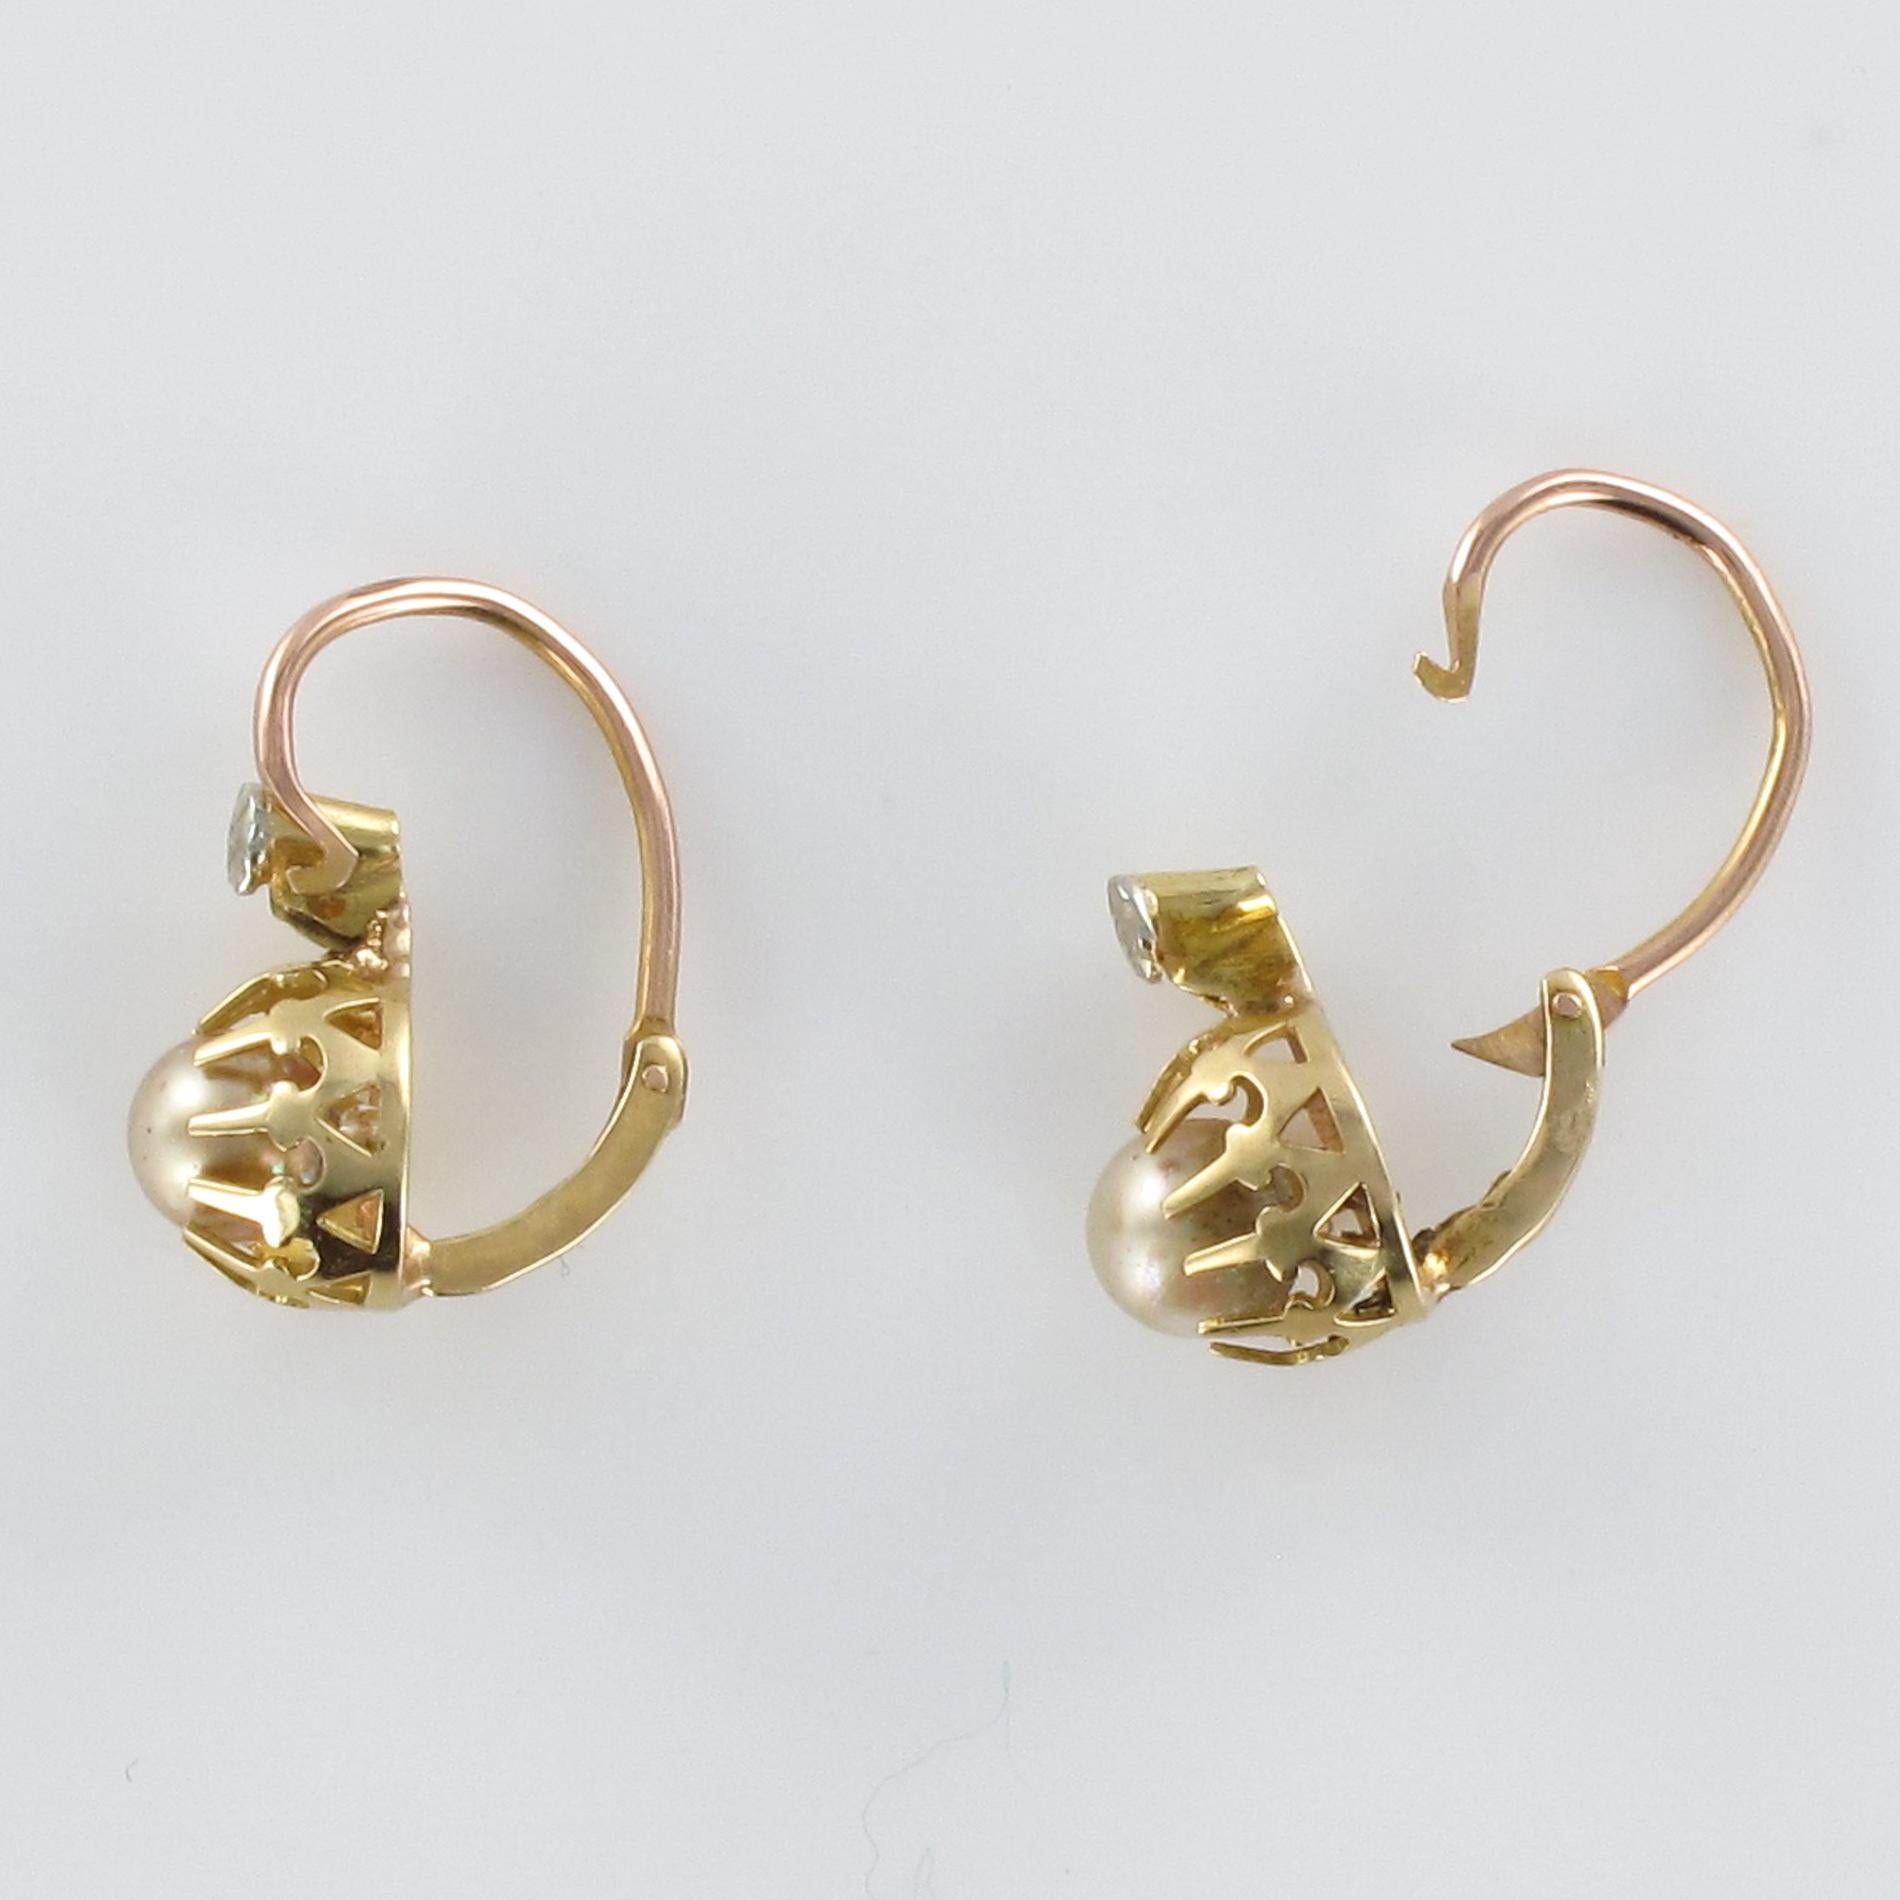 1900s Cultured Pearls Yellow Gold Sleepers Earrings 3